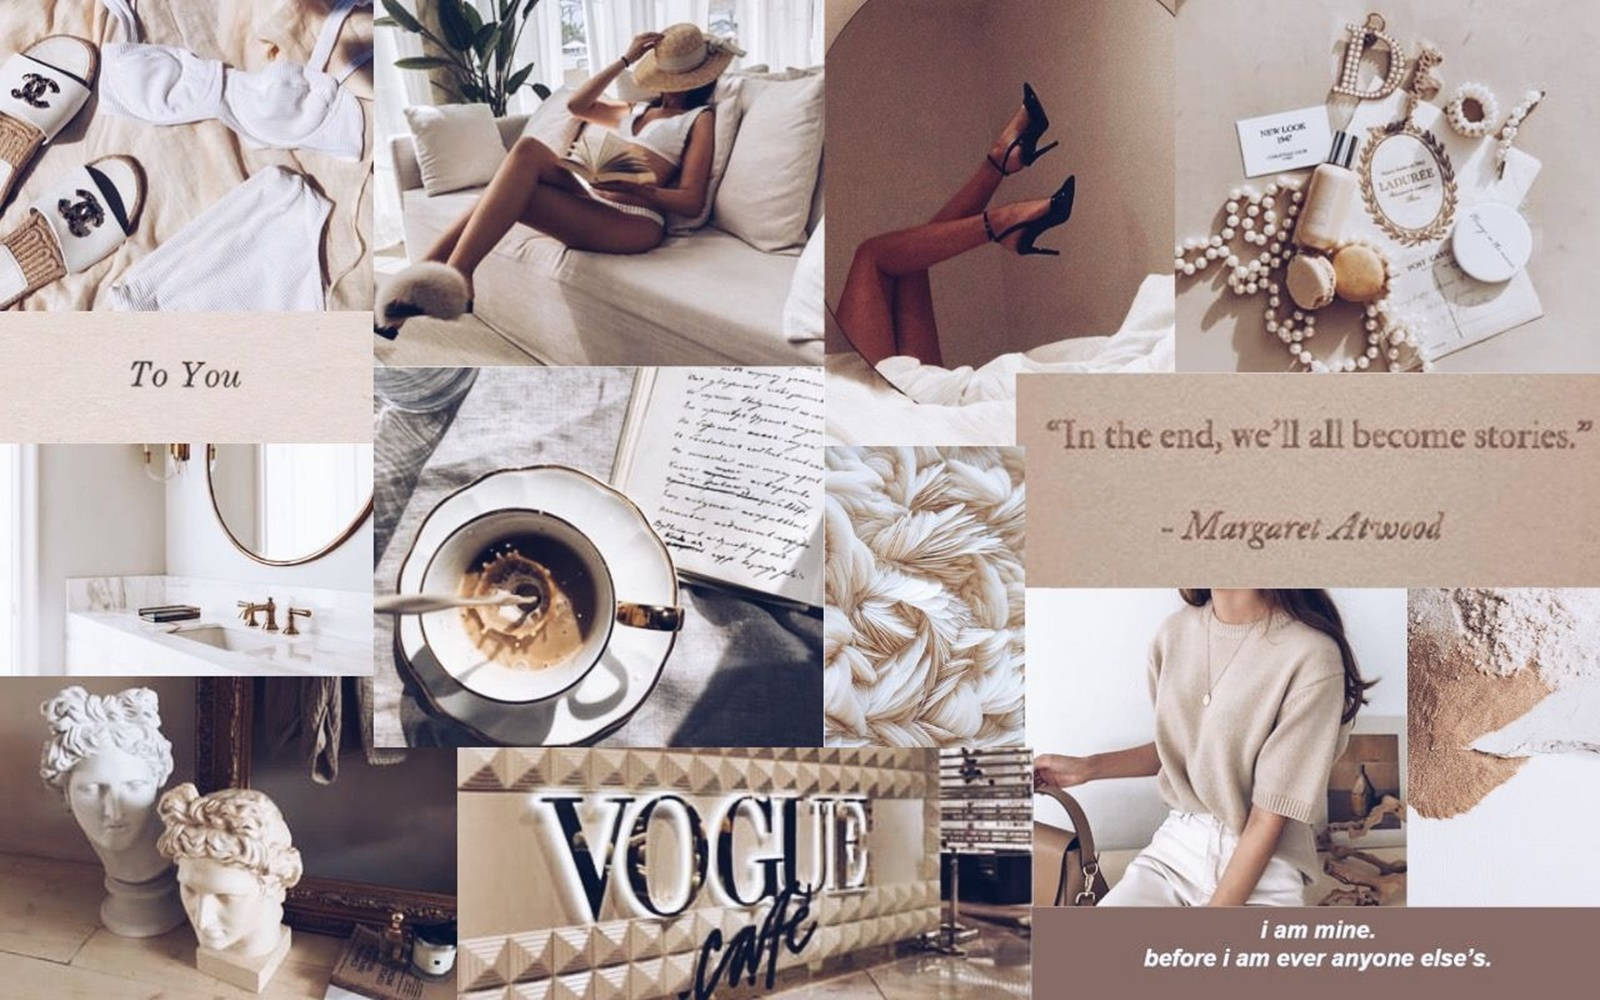 A collage of images including a woman lounging, a cup of coffee, a handbag, a potted plant, and a quote from Margot St. James. - Vogue, Dior, Chanel, beige, fashion